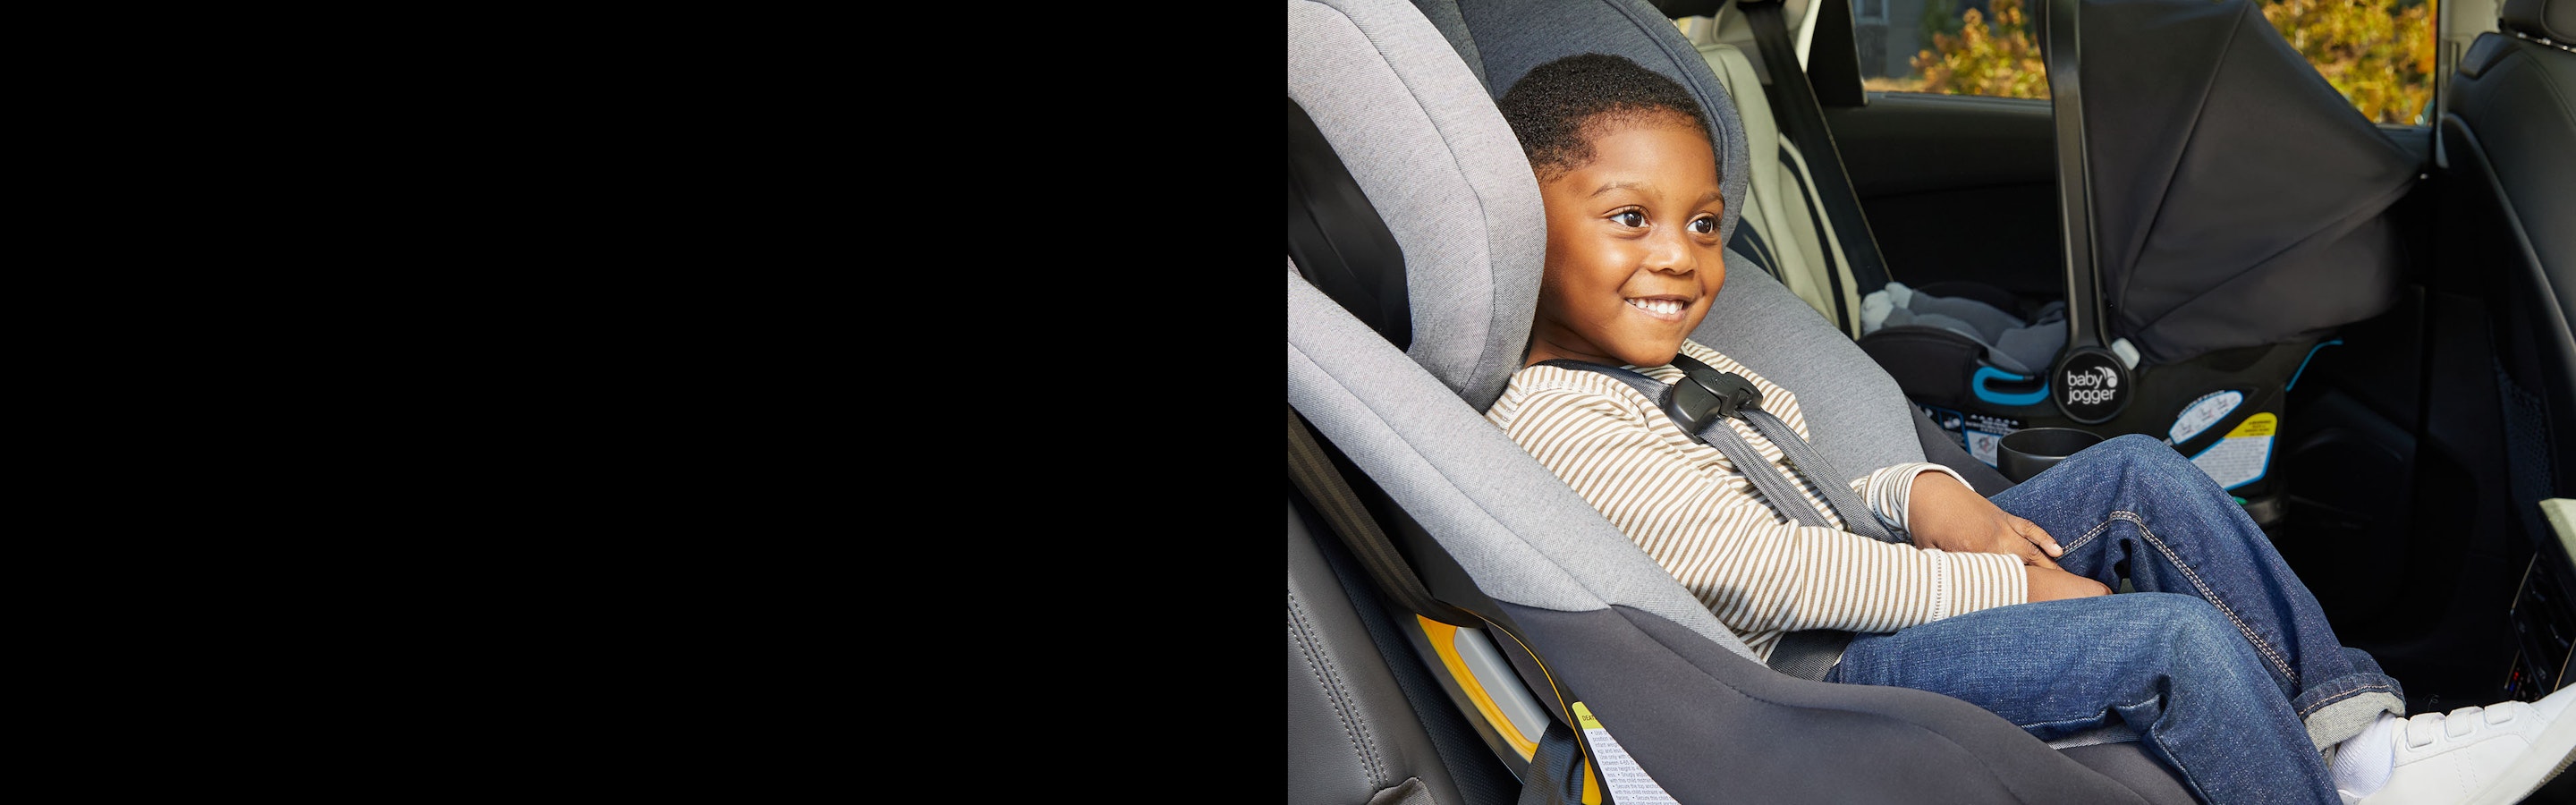 smiling child sitting in car seat in car